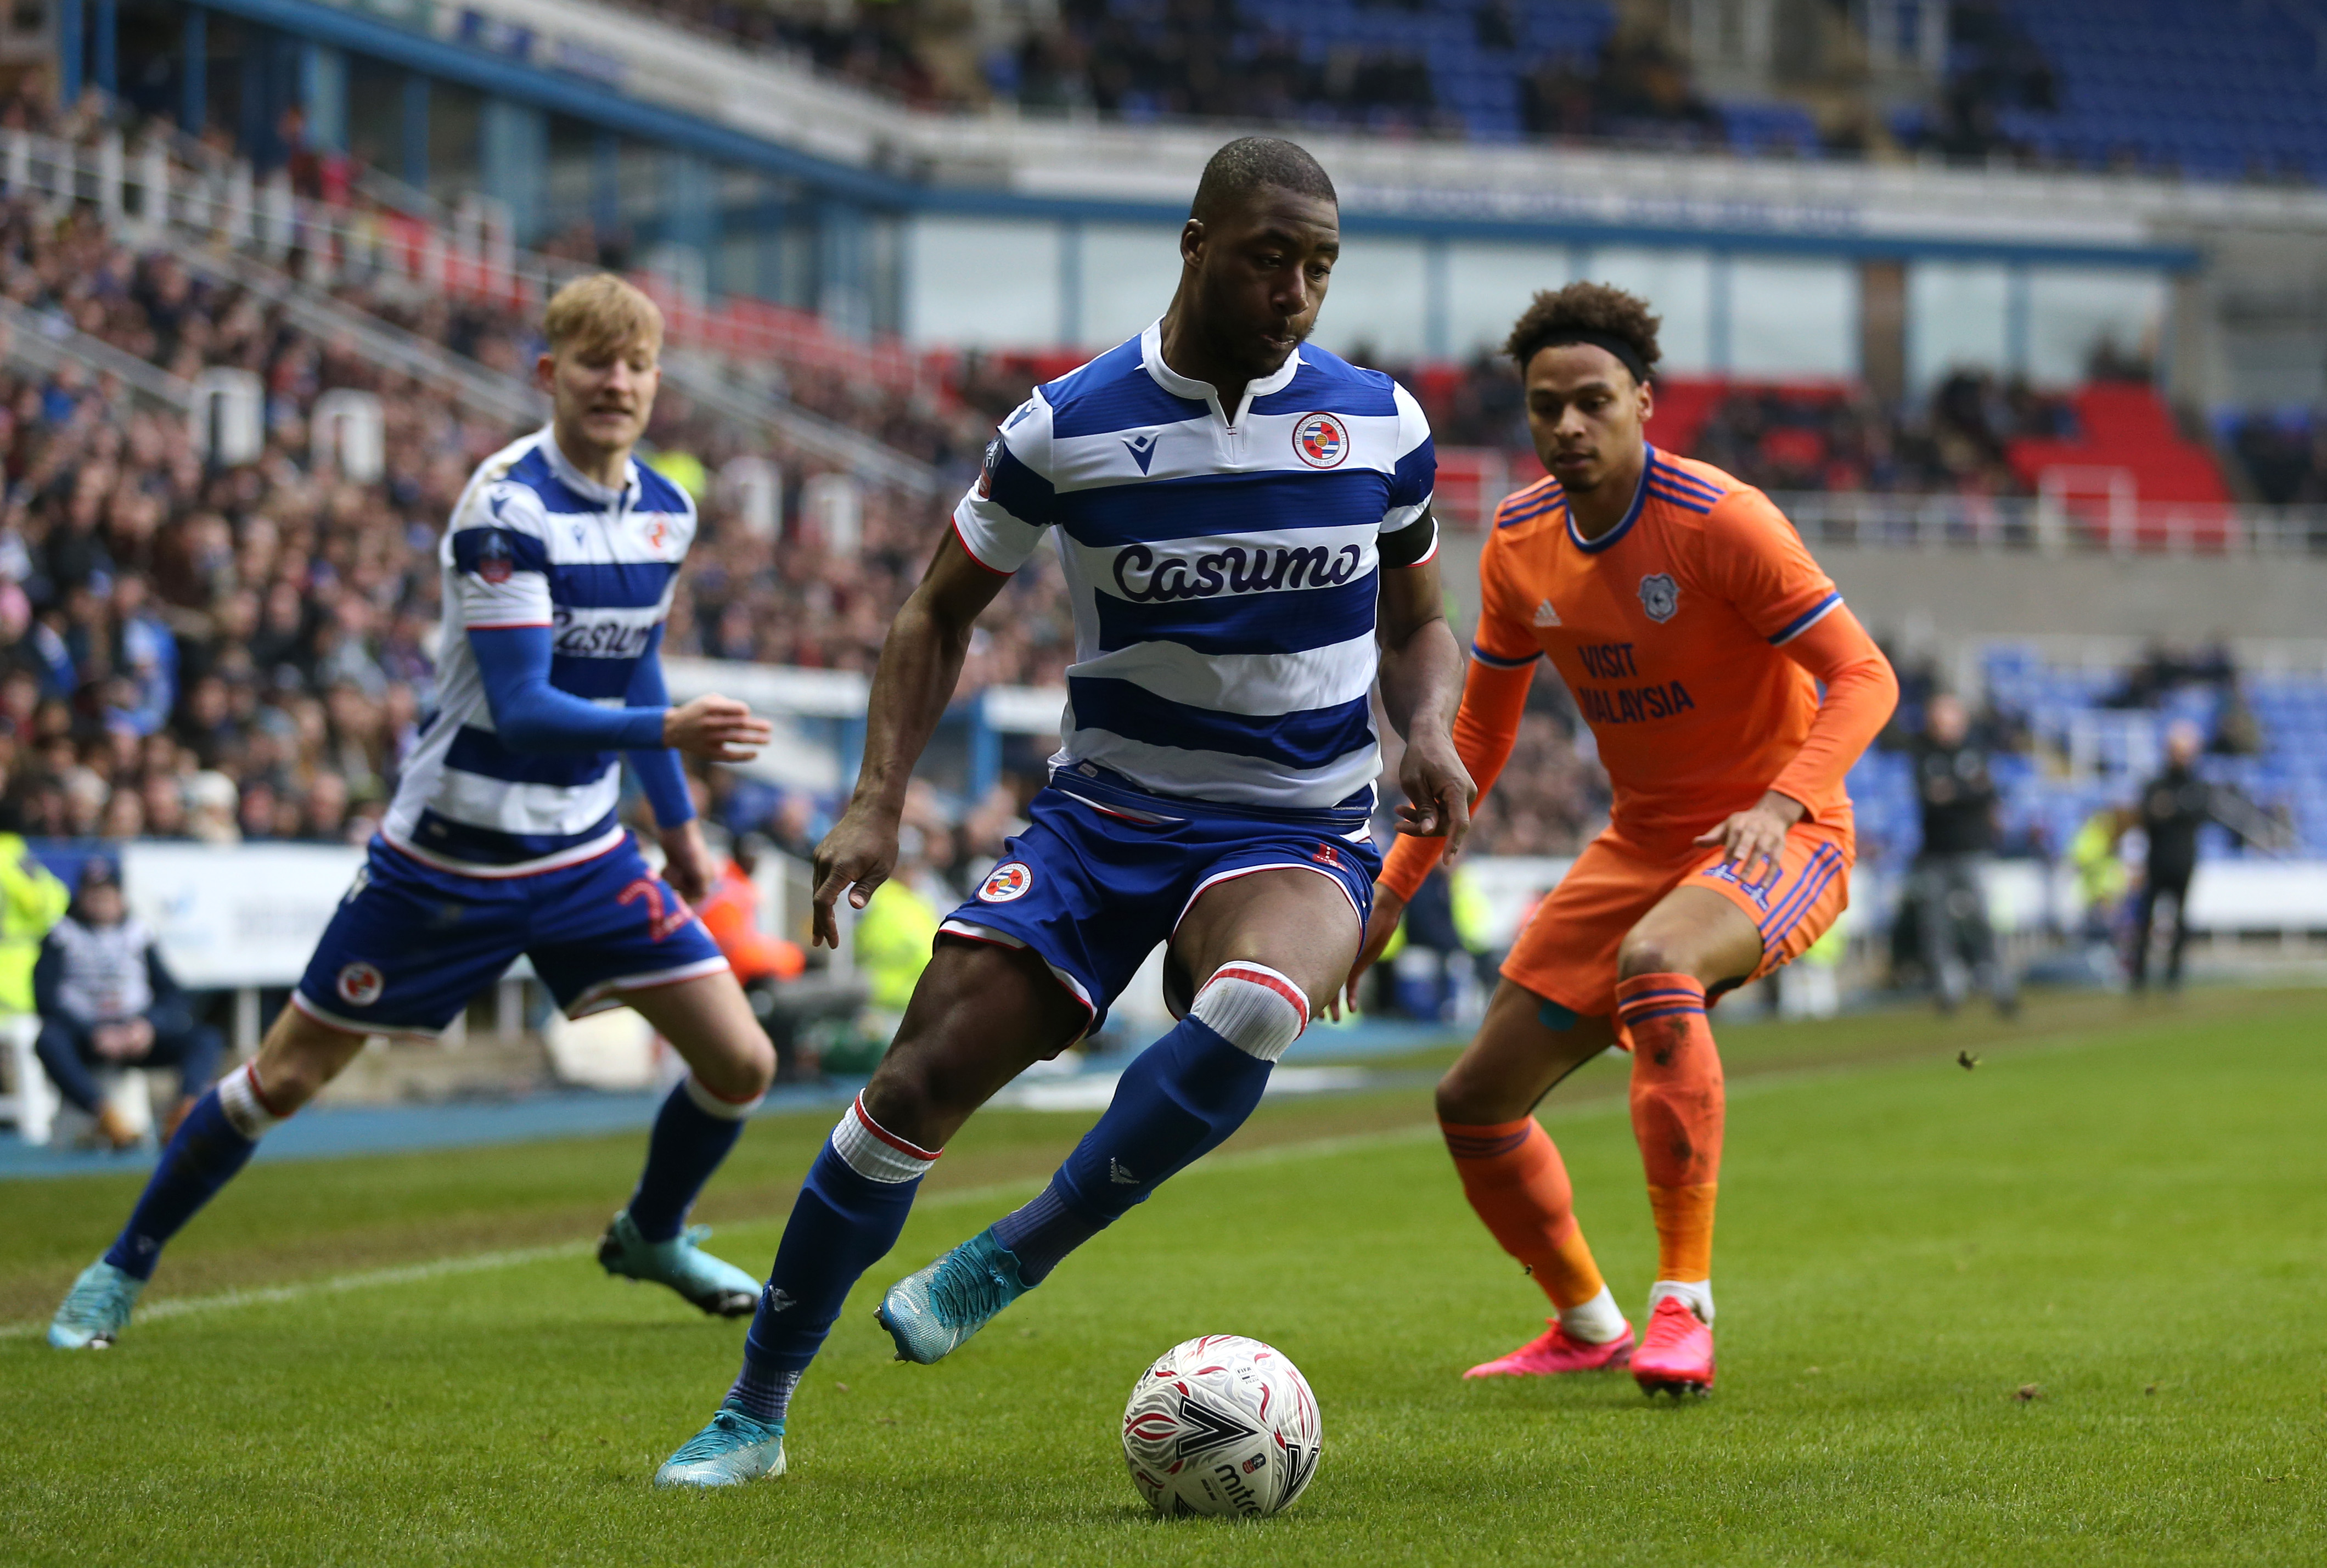 Reading FC v Cardiff City - FA Cup Fourth Round